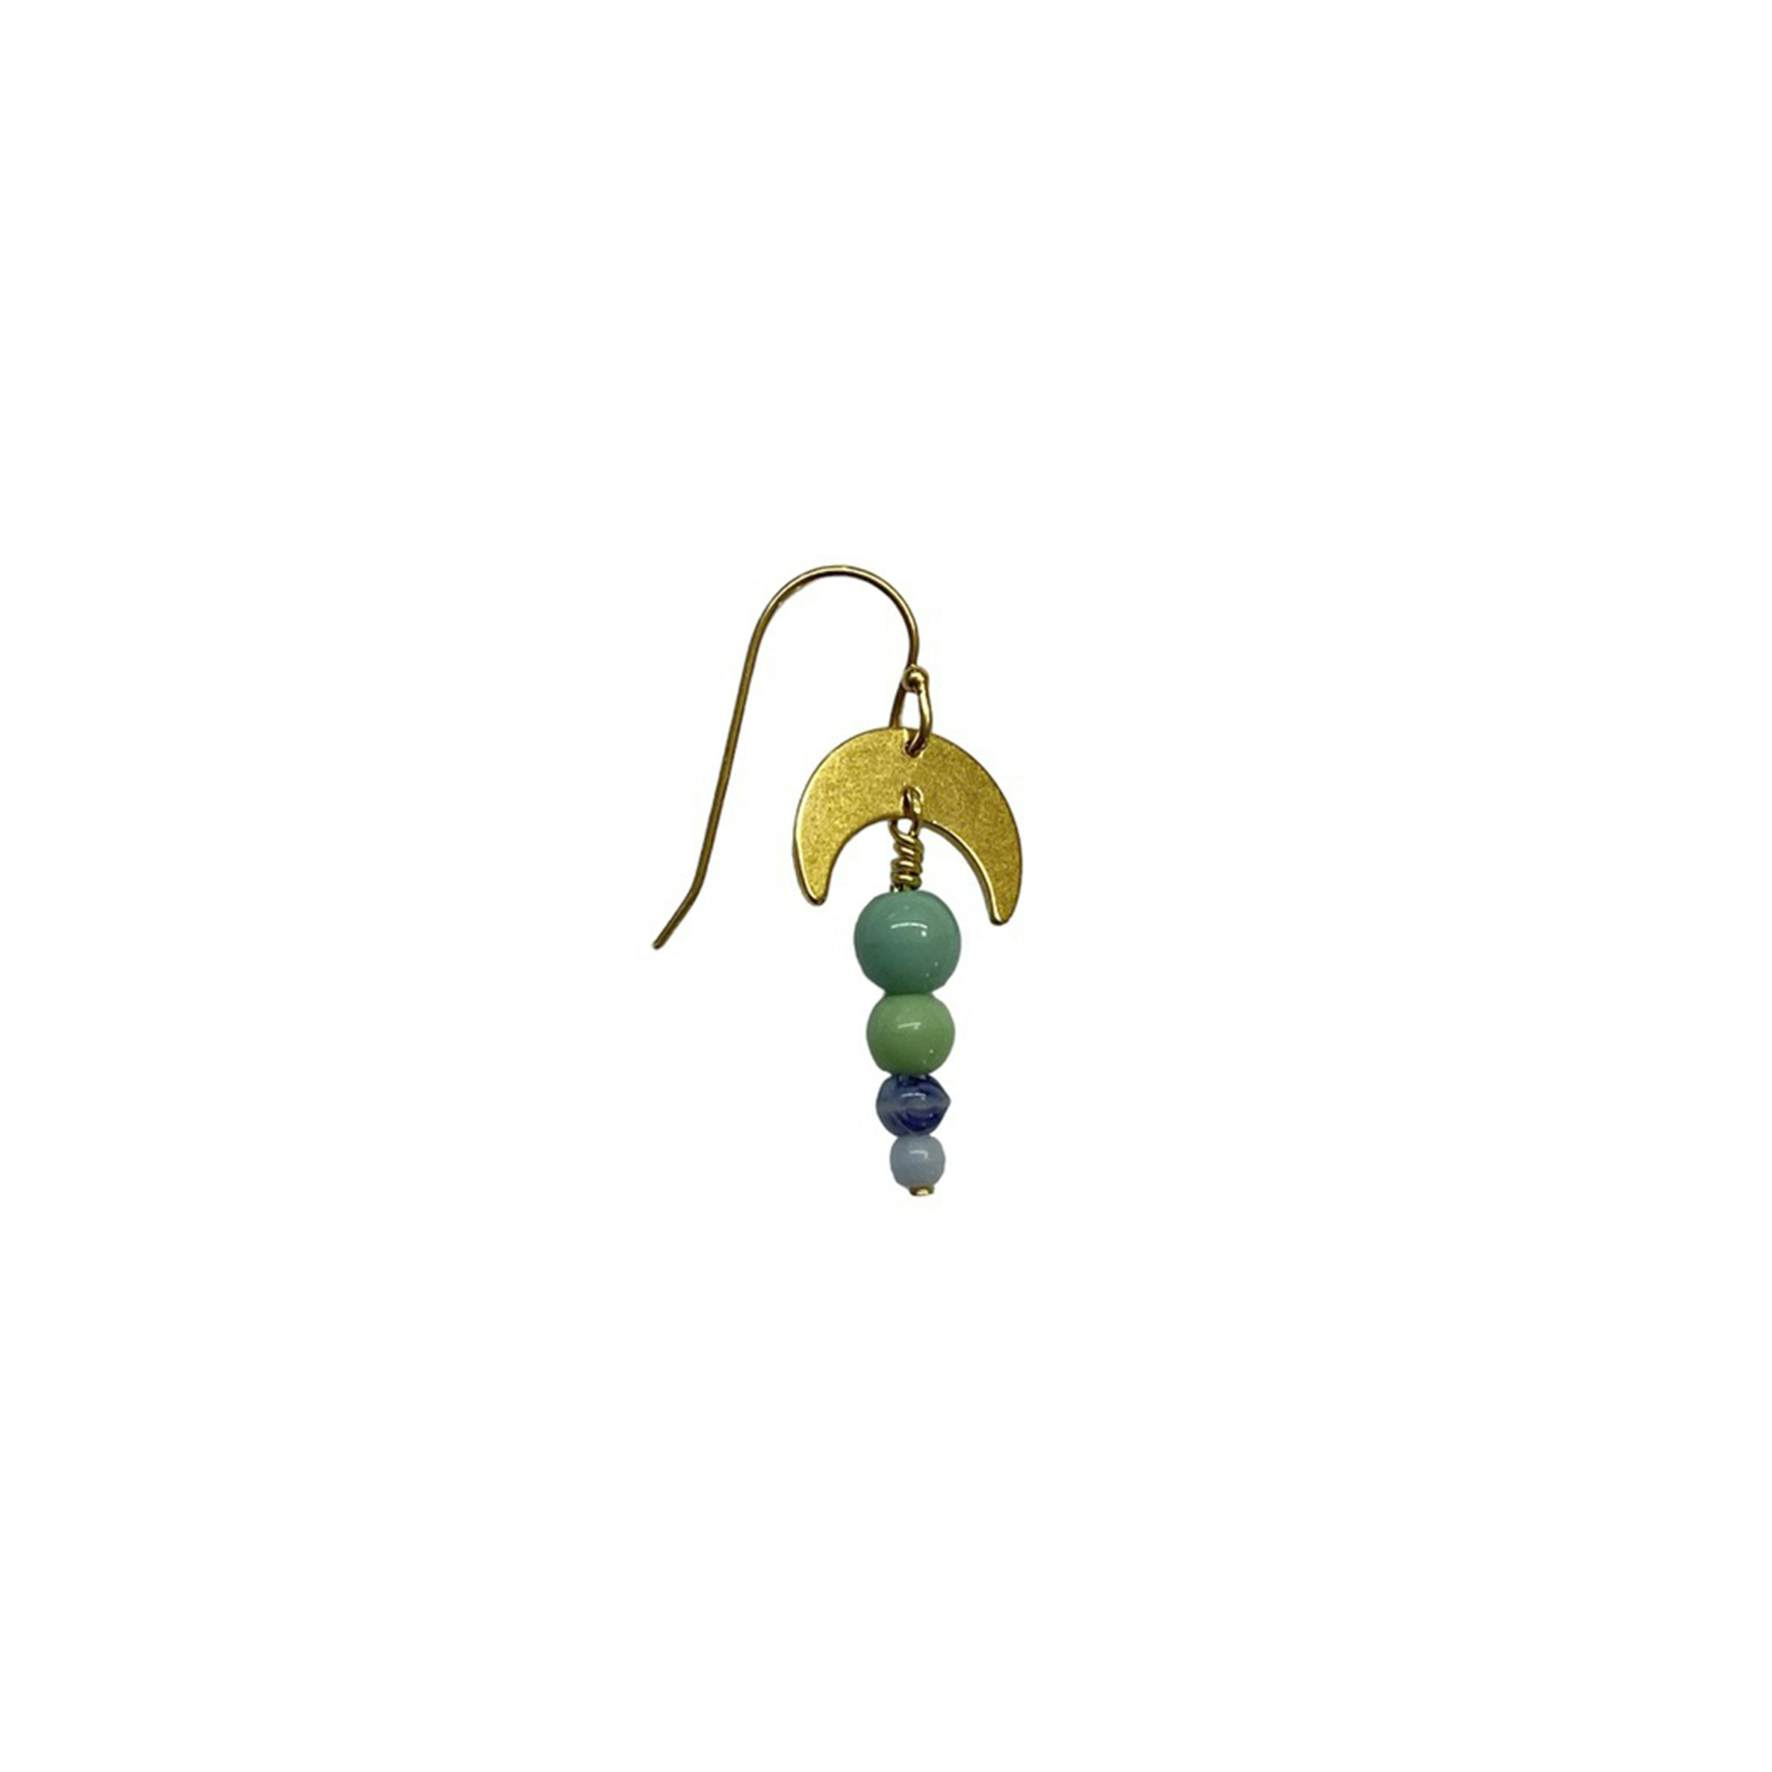 Augusta Earring Aquamarine from Pico in Goldplated-Silver Sterling 925